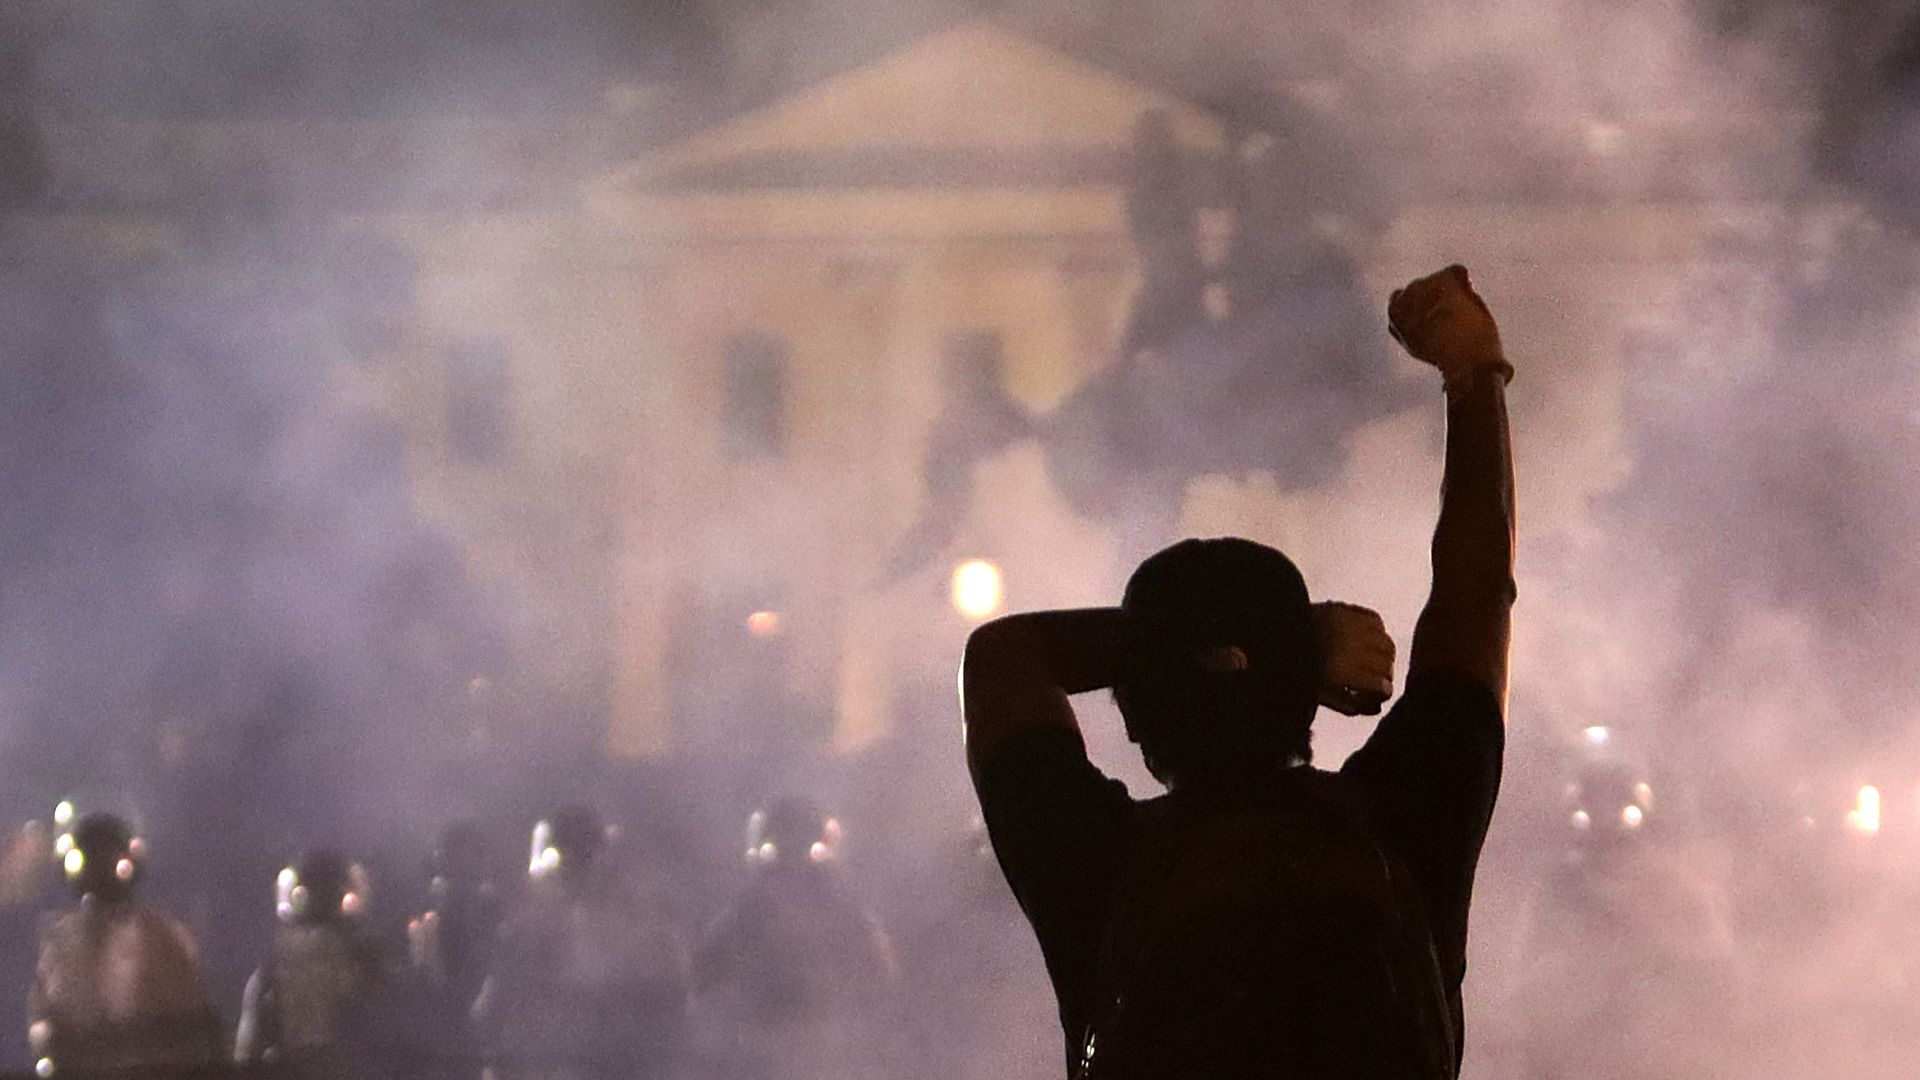 A man holds up his fist during a protest near the White House on May 31, 2020 in Washington, DC. 